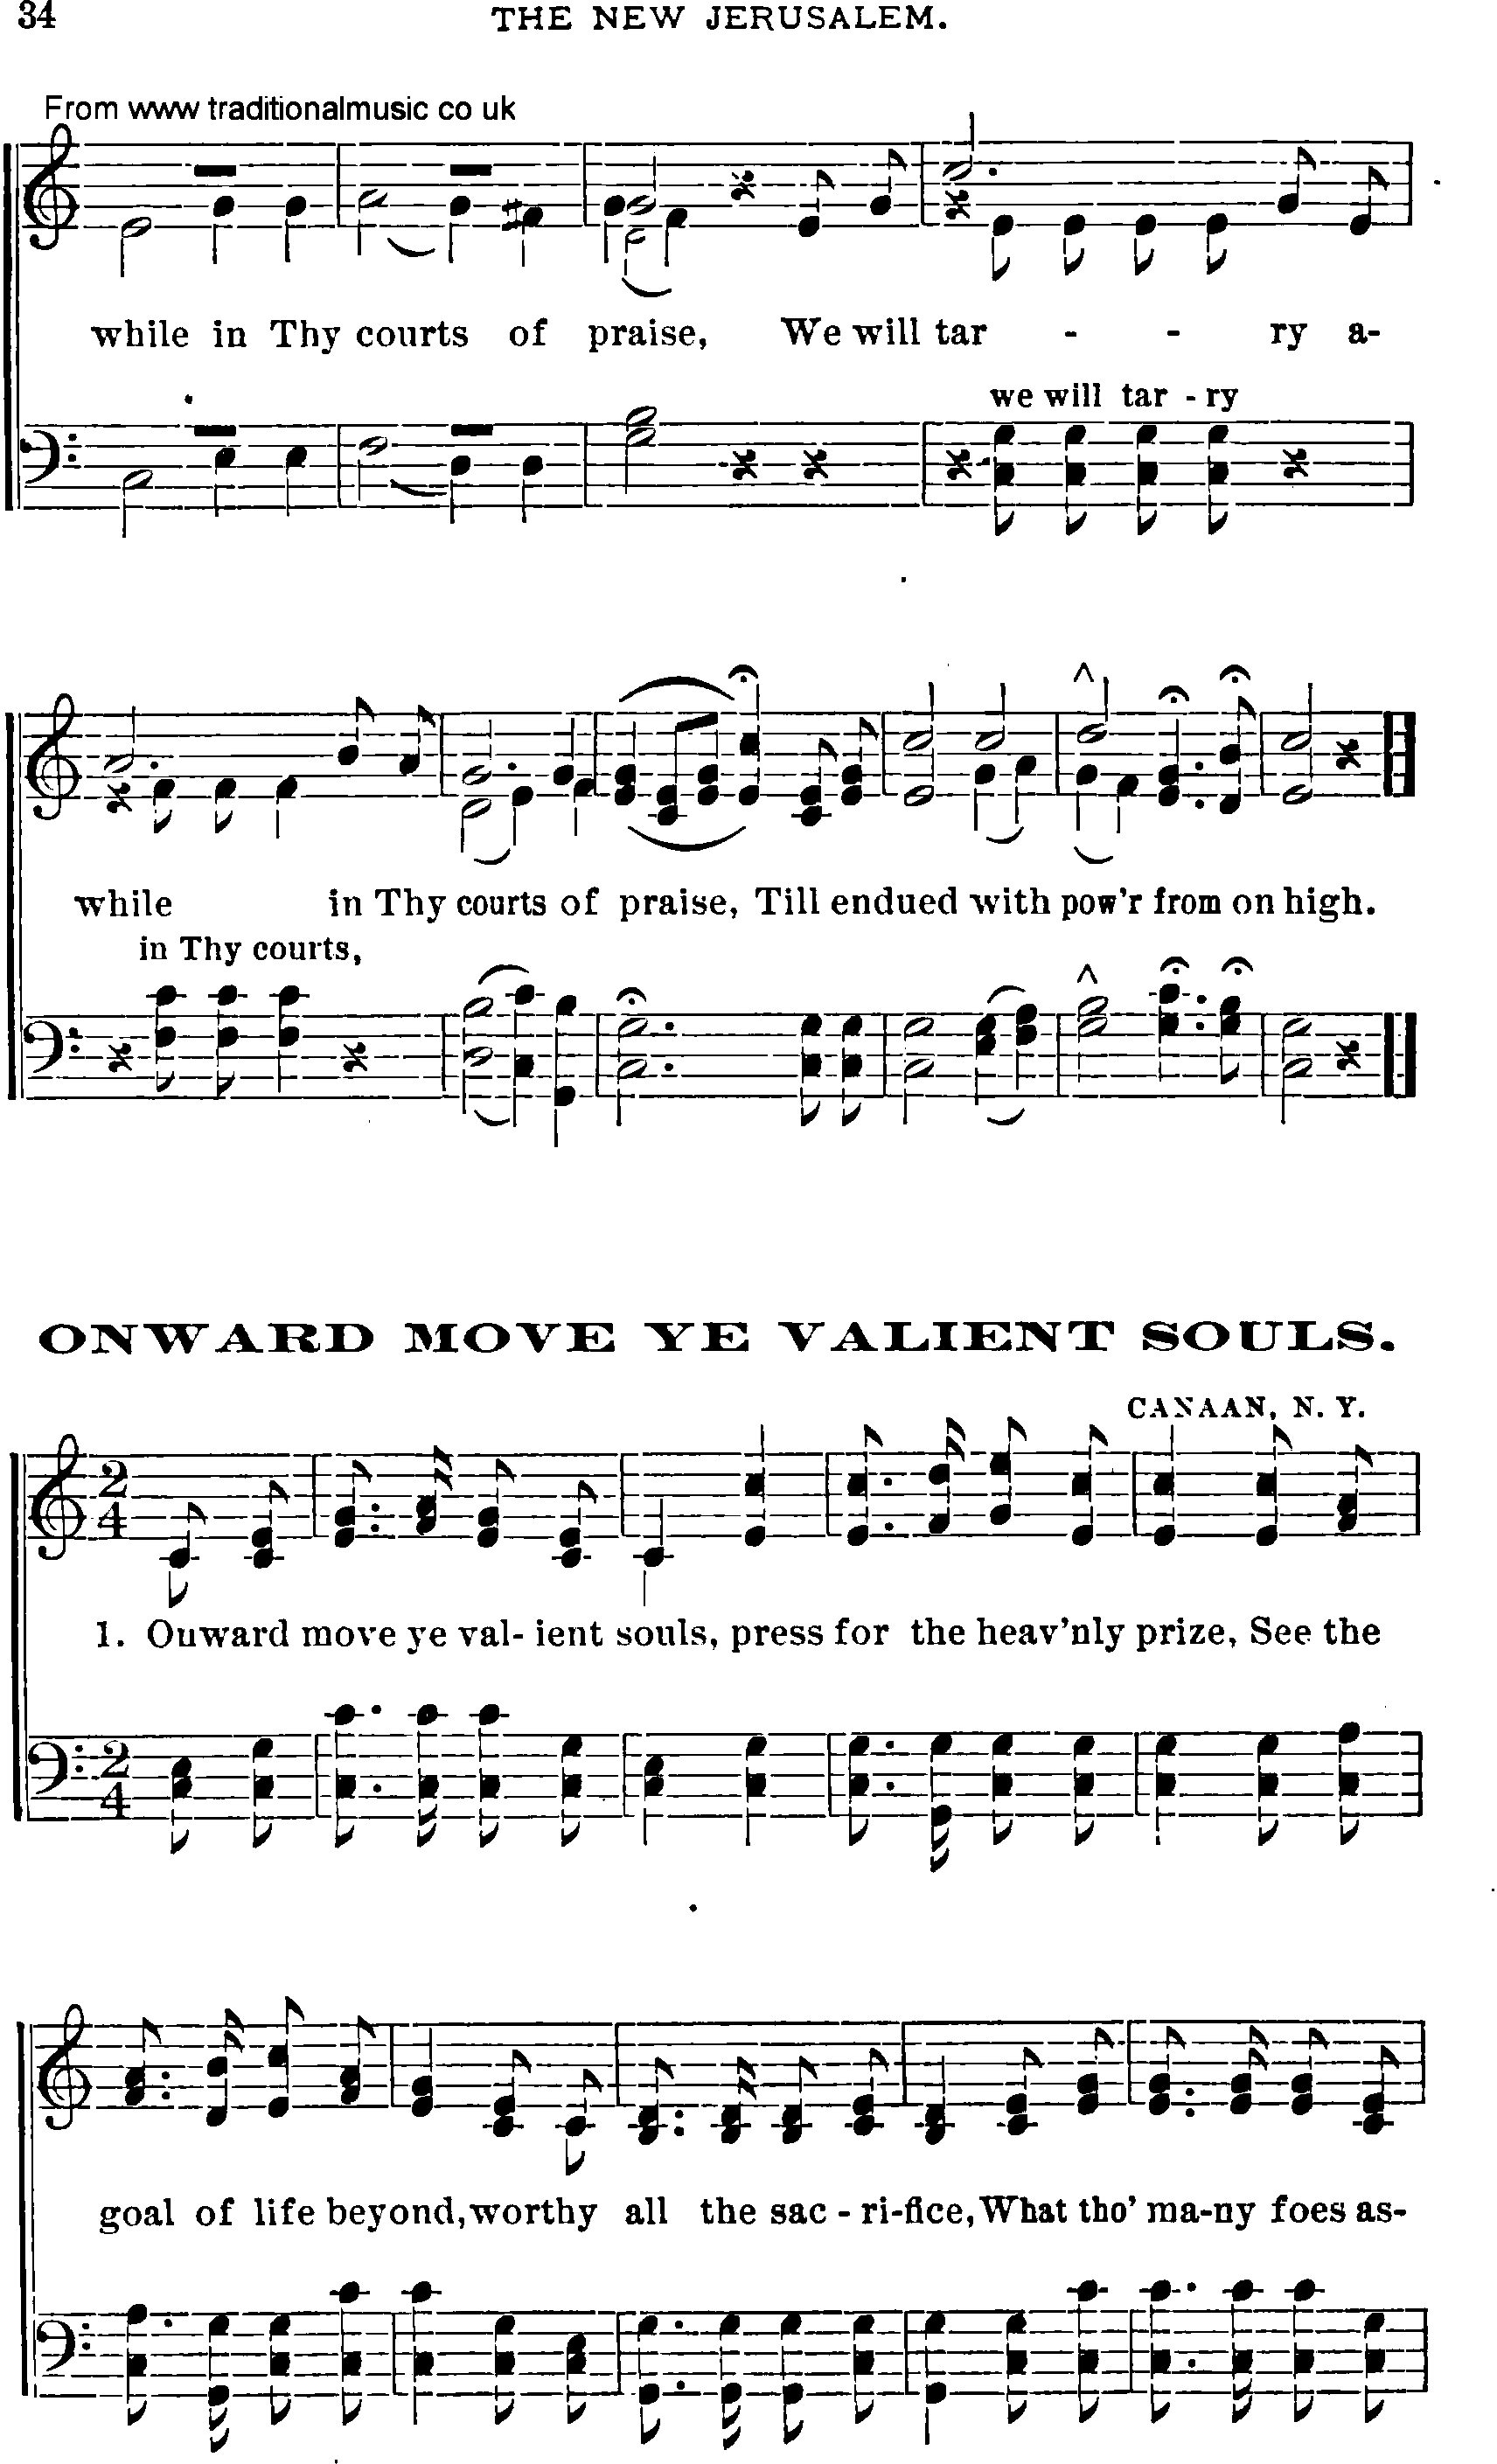 Shaker Music collection, Hymn: onward move ye valient souls, sheetmusic and PDF